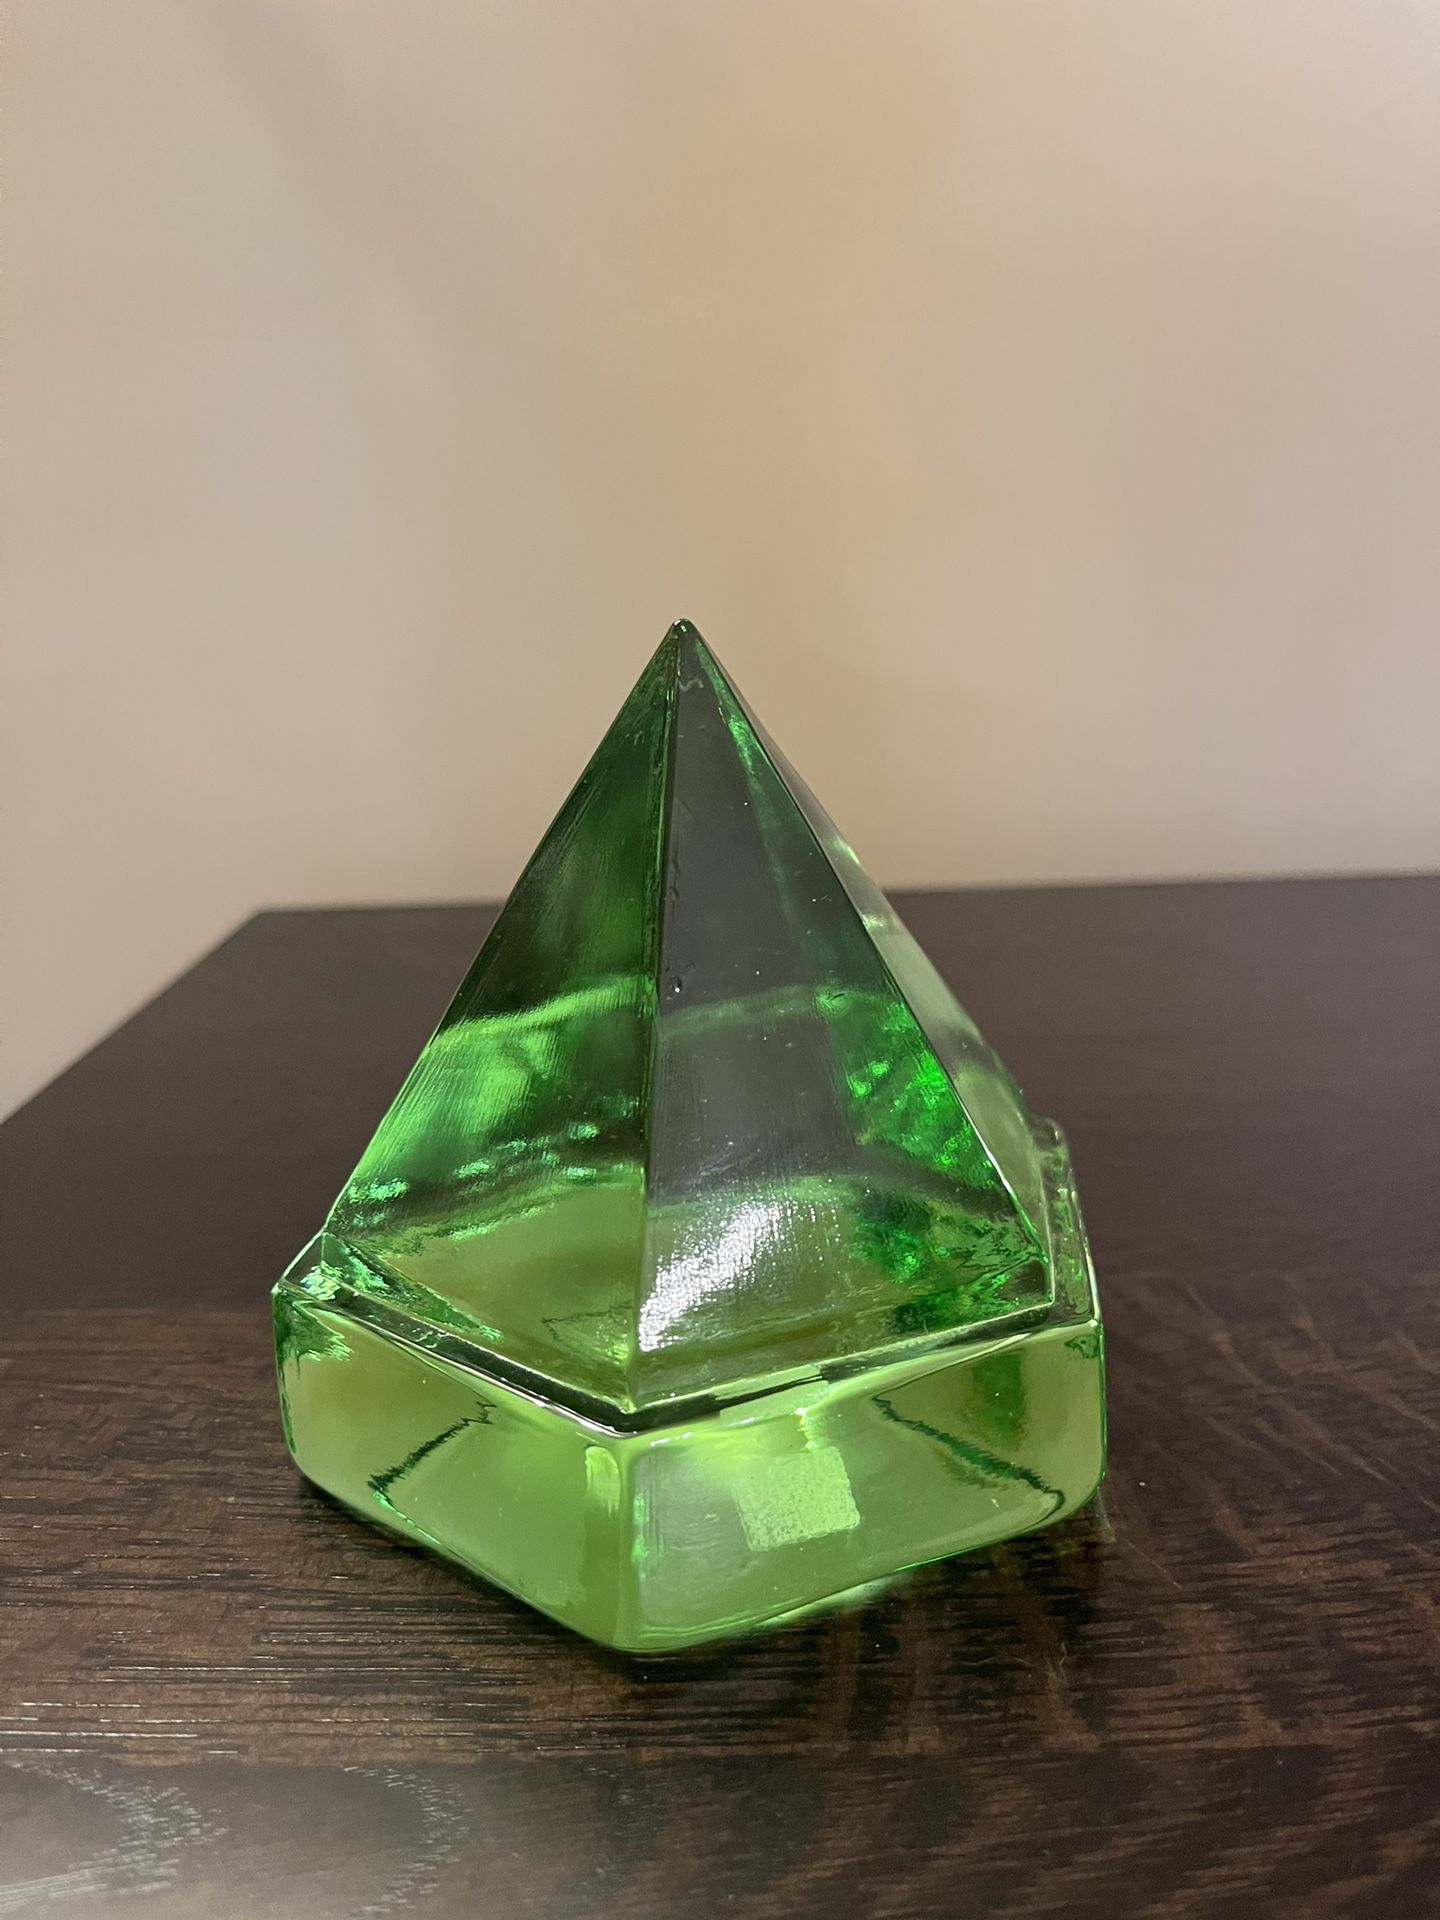 AA Windjammer Glass Deck Prism Replica By Authentic Models Maritime Paper Weight